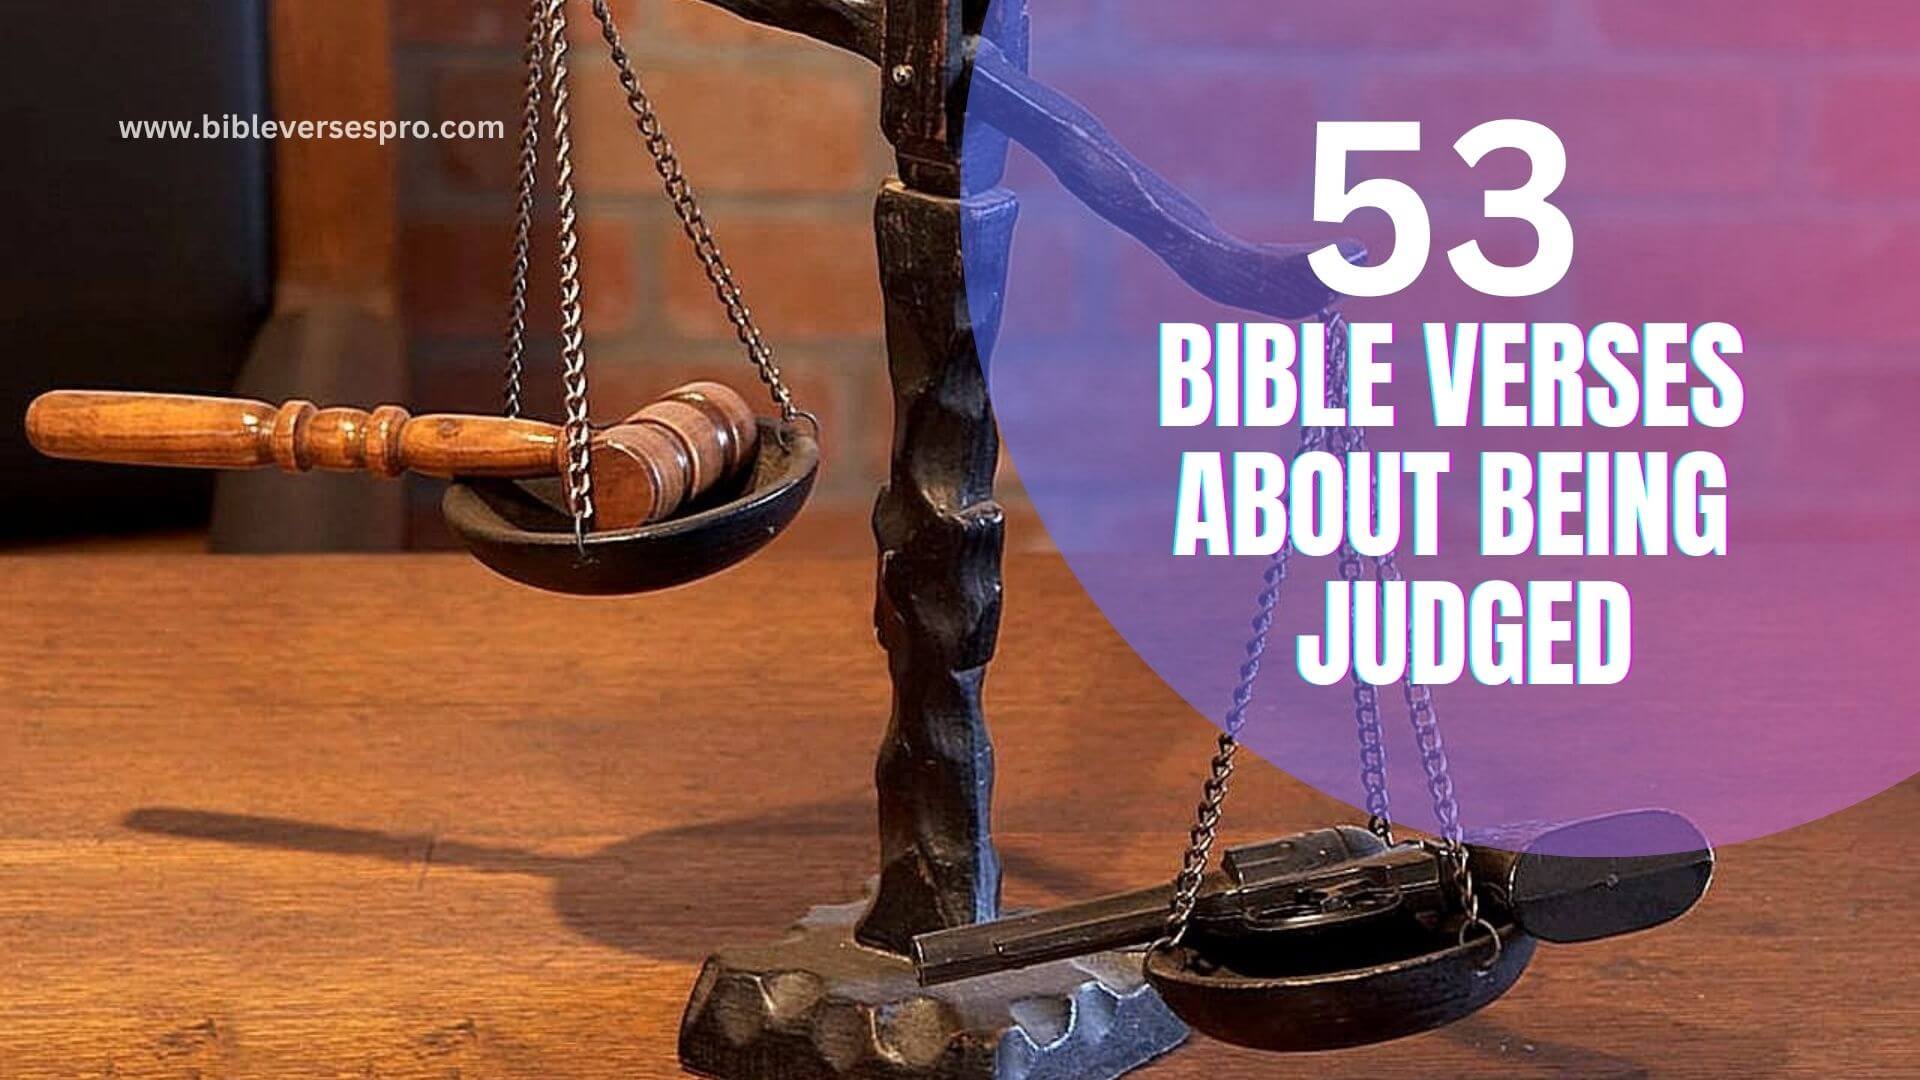 BIBLE VERSES ABOUT BEING JUDGED